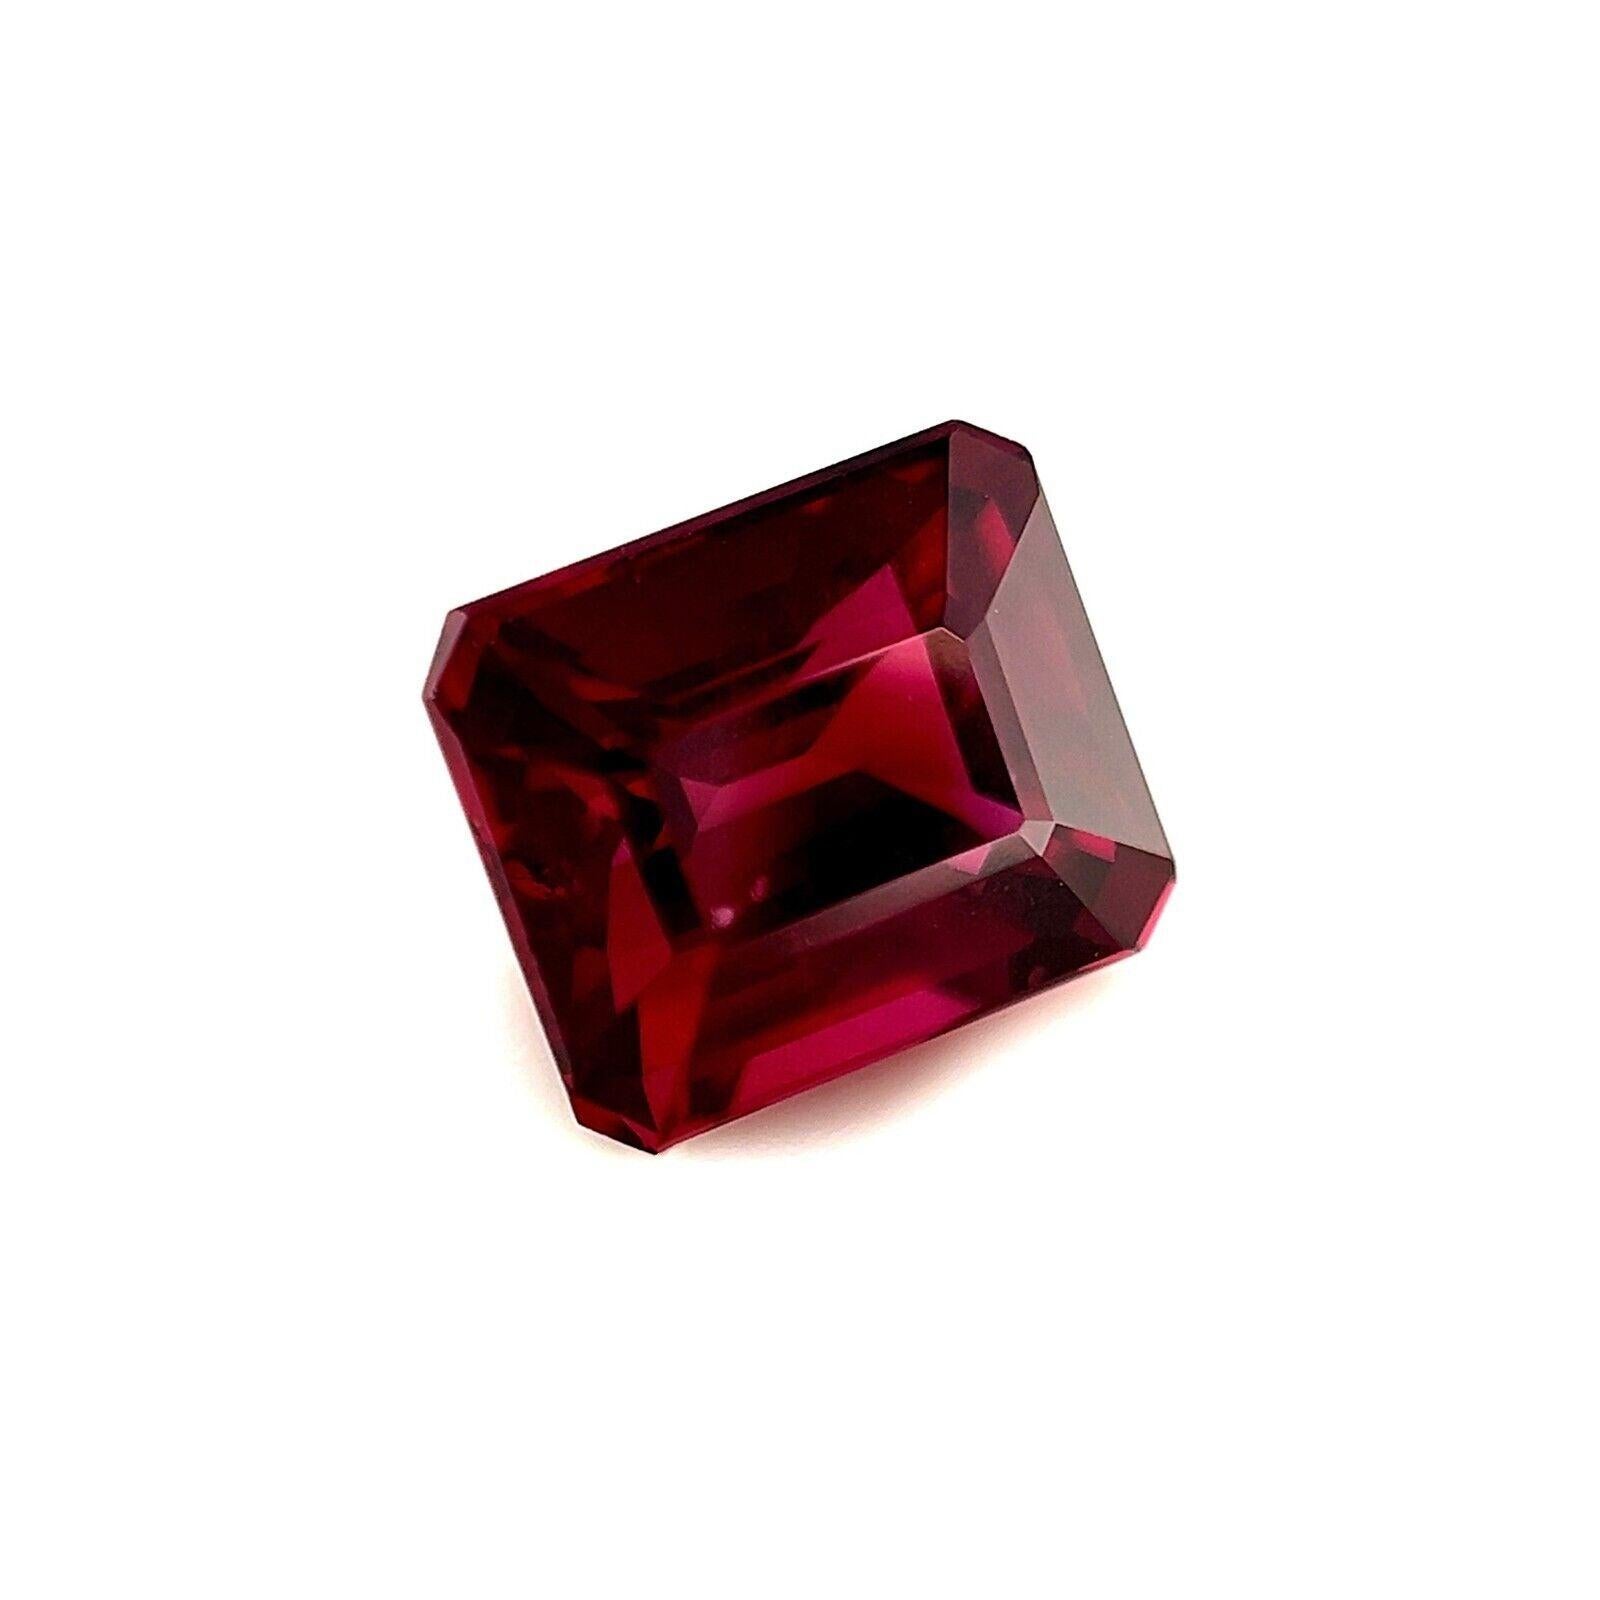 Natural 3.54ct Purplish Pink Garnet Octagon Cut Loose Gem Madagascar VS

Natural Rhodolite Loose Gemstone.
3.54 carat stone with a beautiful purplish pink colour and good clarity. Also has an excellent emerald octagonal cut with good proportions and